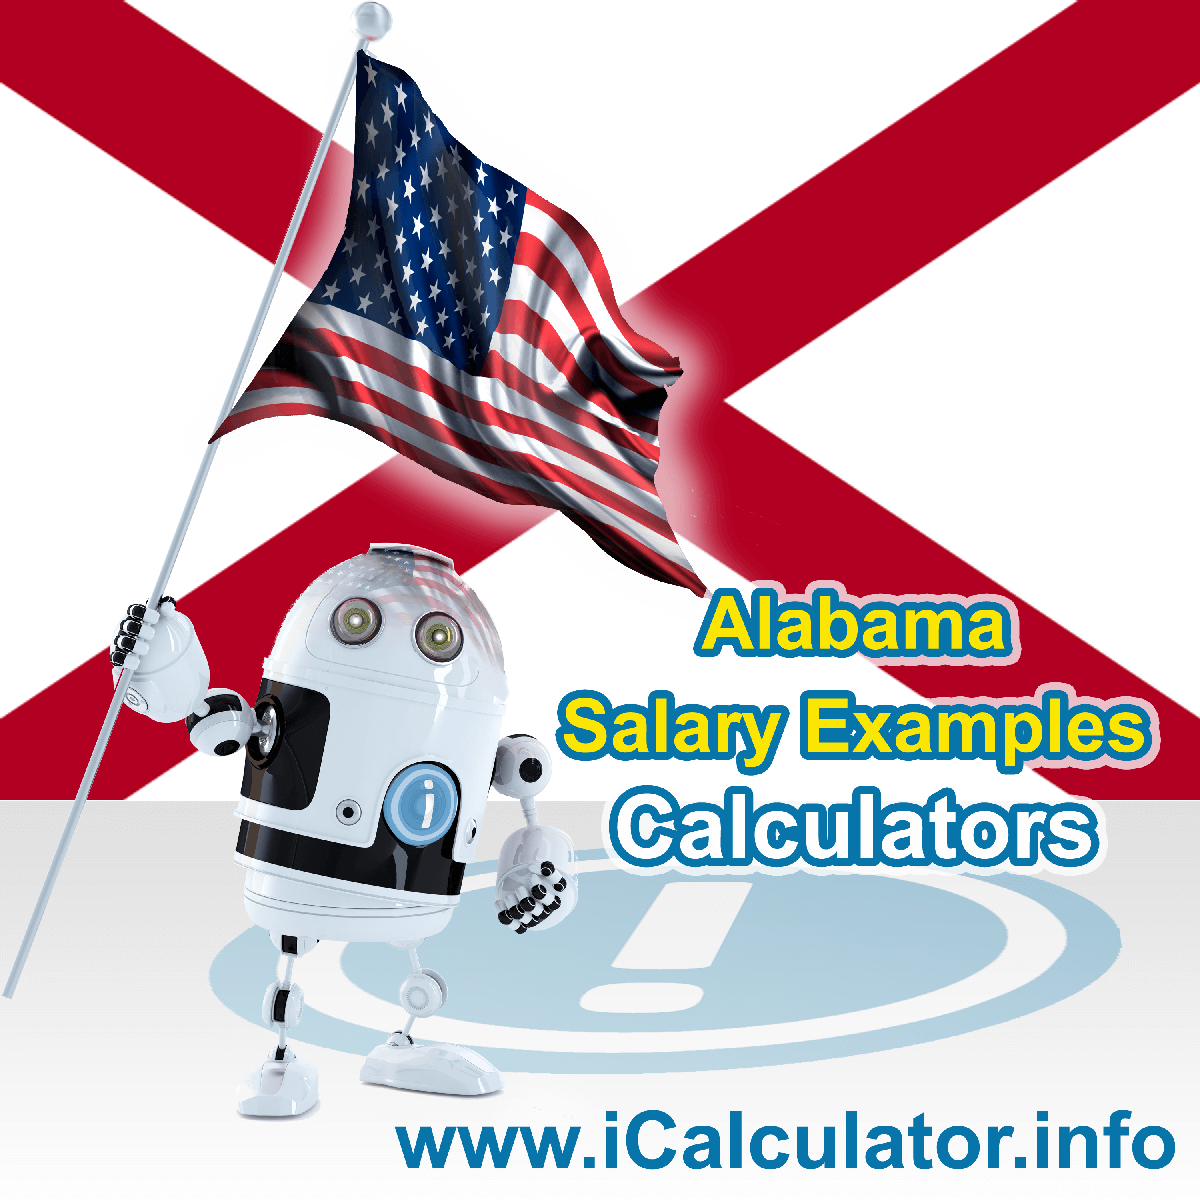 Alabama Salary Example for $ 230,000.00 in 2023 | iCalculator™ | $ 230,000.00 salary example for employee and employer paying Alabama State tincome taxes. Detailed salary after tax calculation including Alabama State Tax, Federal State Tax, Medicare Deductions, Social Security, Capital Gains and other income tax and salary deductions complete with supporting Alabama state tax tables 